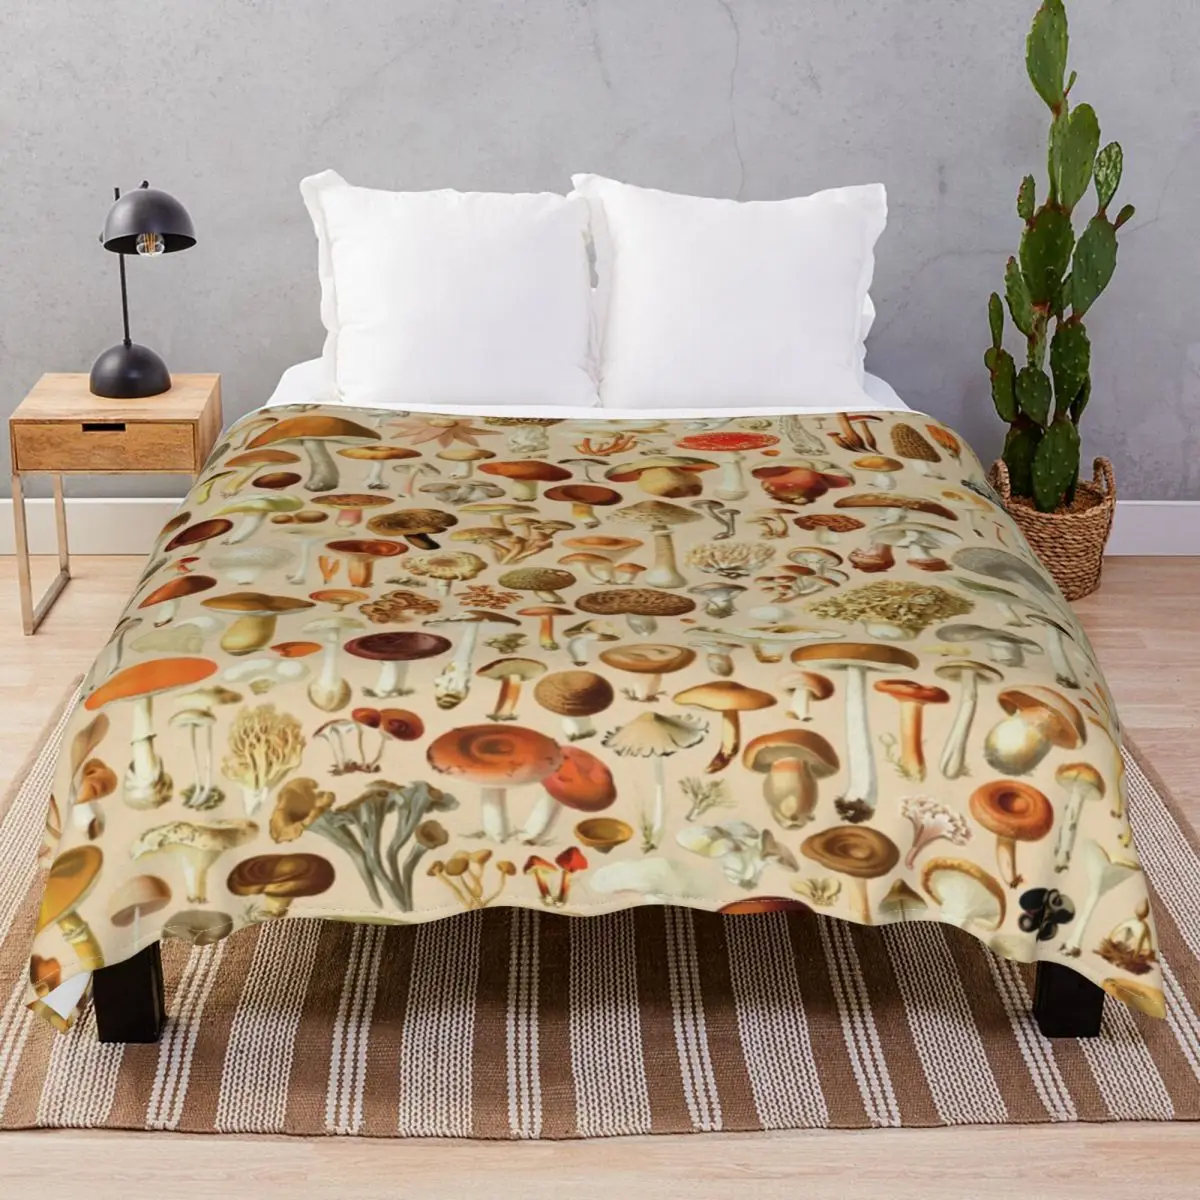 Vintage Mushroom Collection Blankets Coral Fleece Print Breathable Unisex Throw Blanket for Bedding Home Couch Travel Office